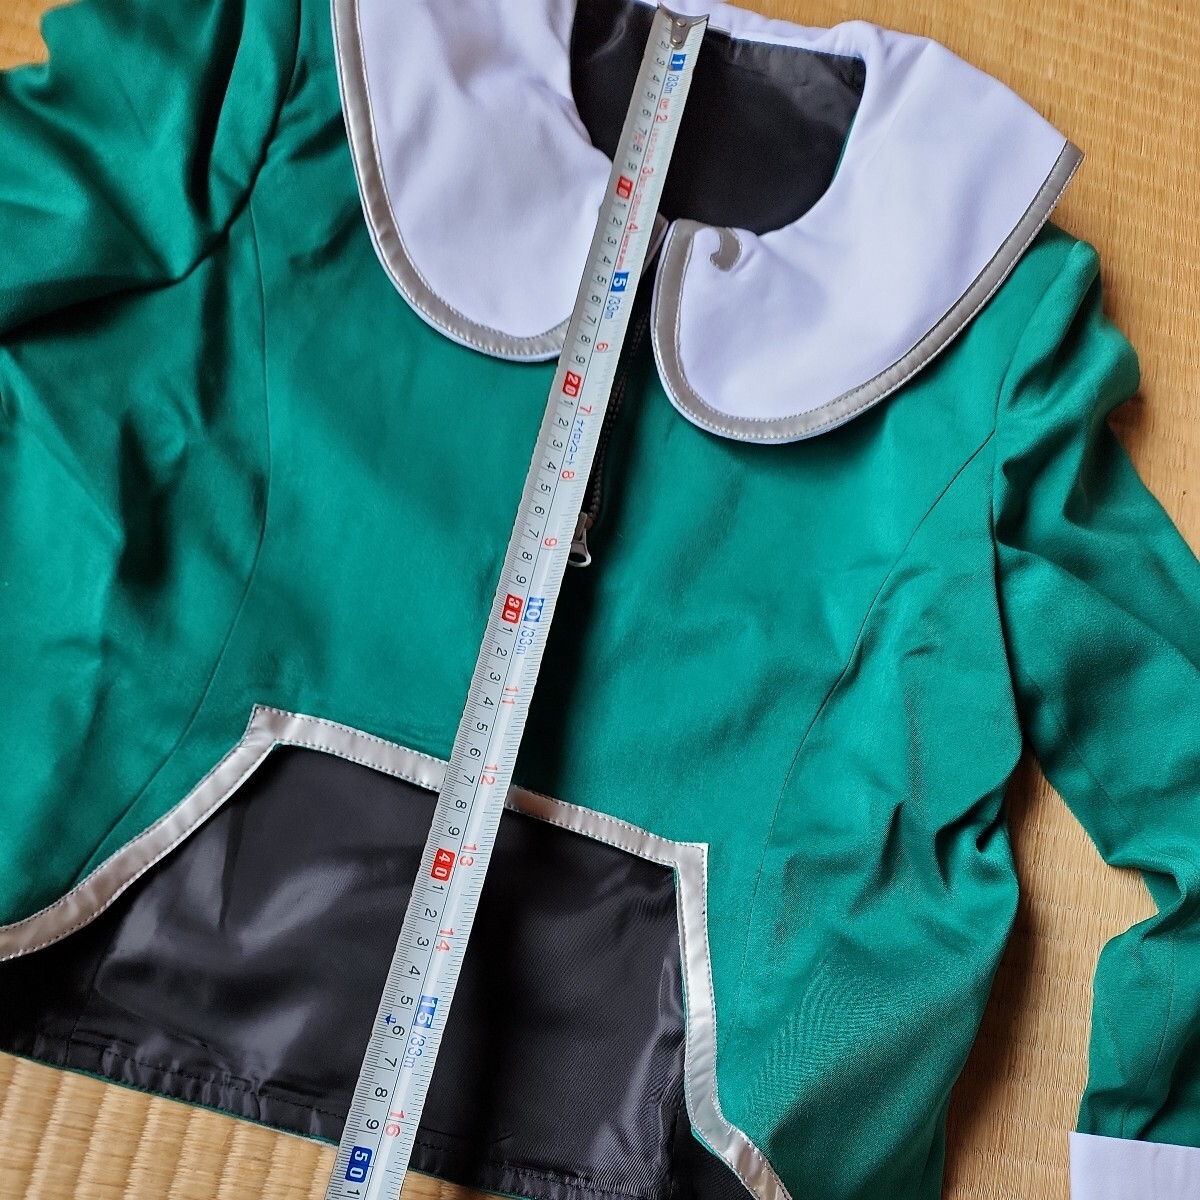 STARDRIVER brilliancy. tact south 10 character an educational institution woman uniform M size one jpy start cosplay ..( rear . scratch . was ) green . light green 